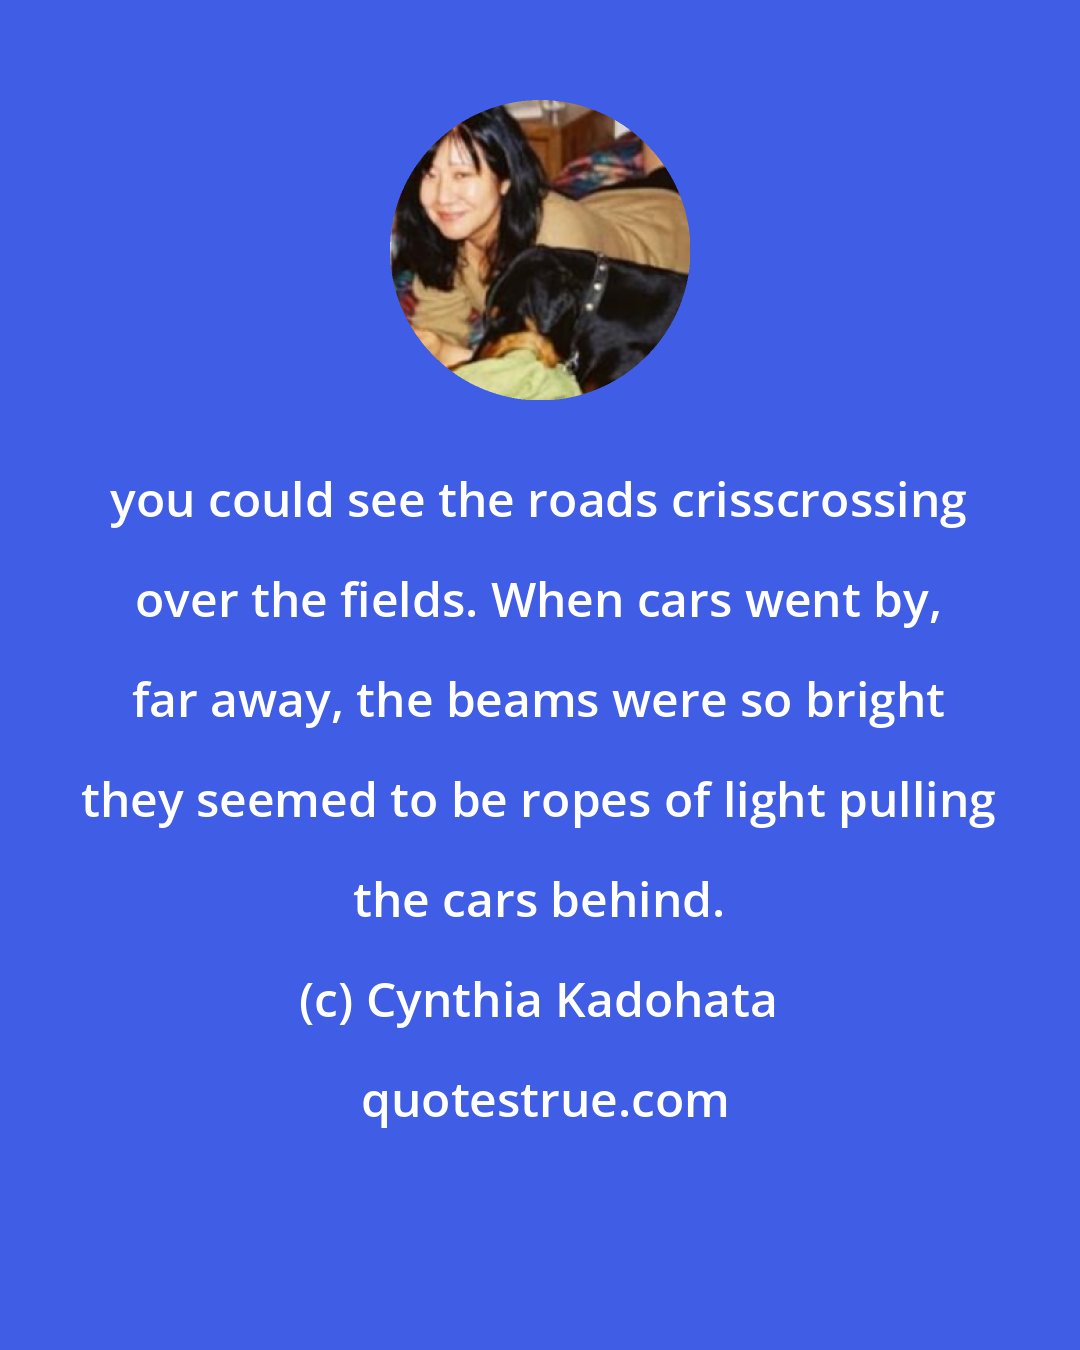 Cynthia Kadohata: you could see the roads crisscrossing over the fields. When cars went by, far away, the beams were so bright they seemed to be ropes of light pulling the cars behind.